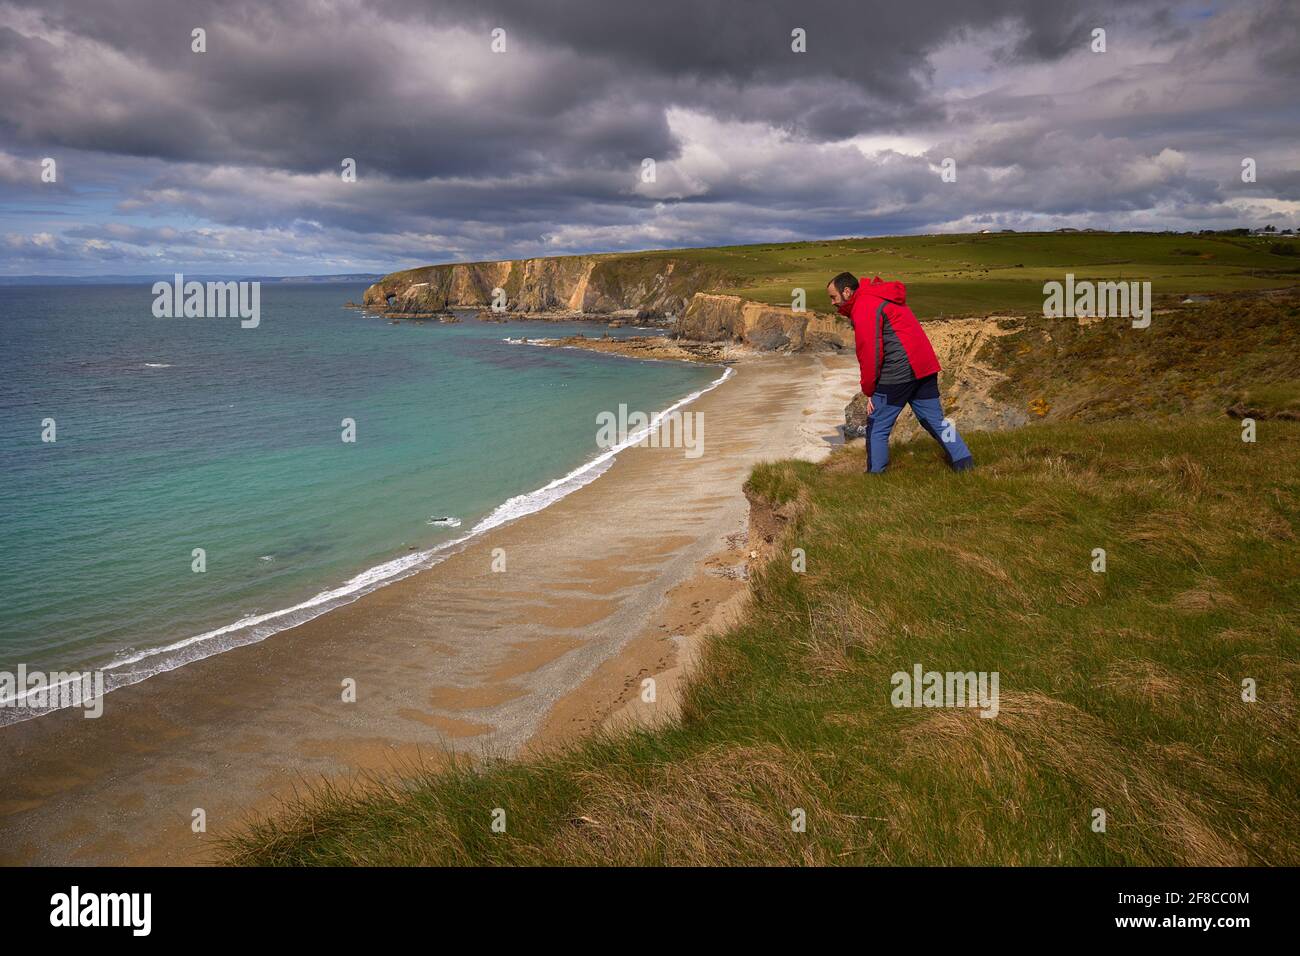 man looking over a cliff of the coast of cooper. Kilfarrasy Beach. Co.Waterford Coastline, Ireland Stock Photo